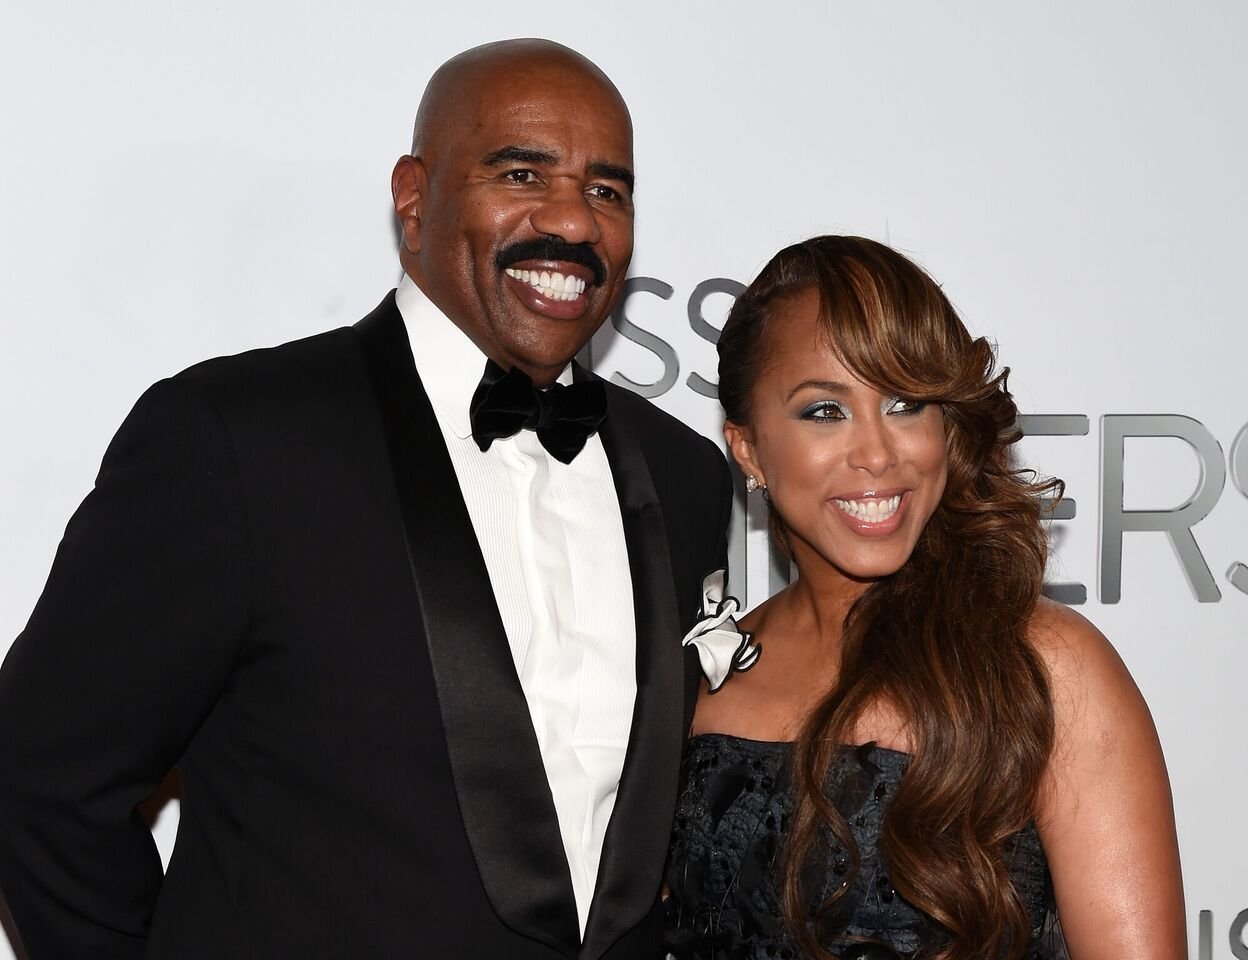 Steve Harvey & Wife Marjorie Pose in Face Masks after Heading Home to